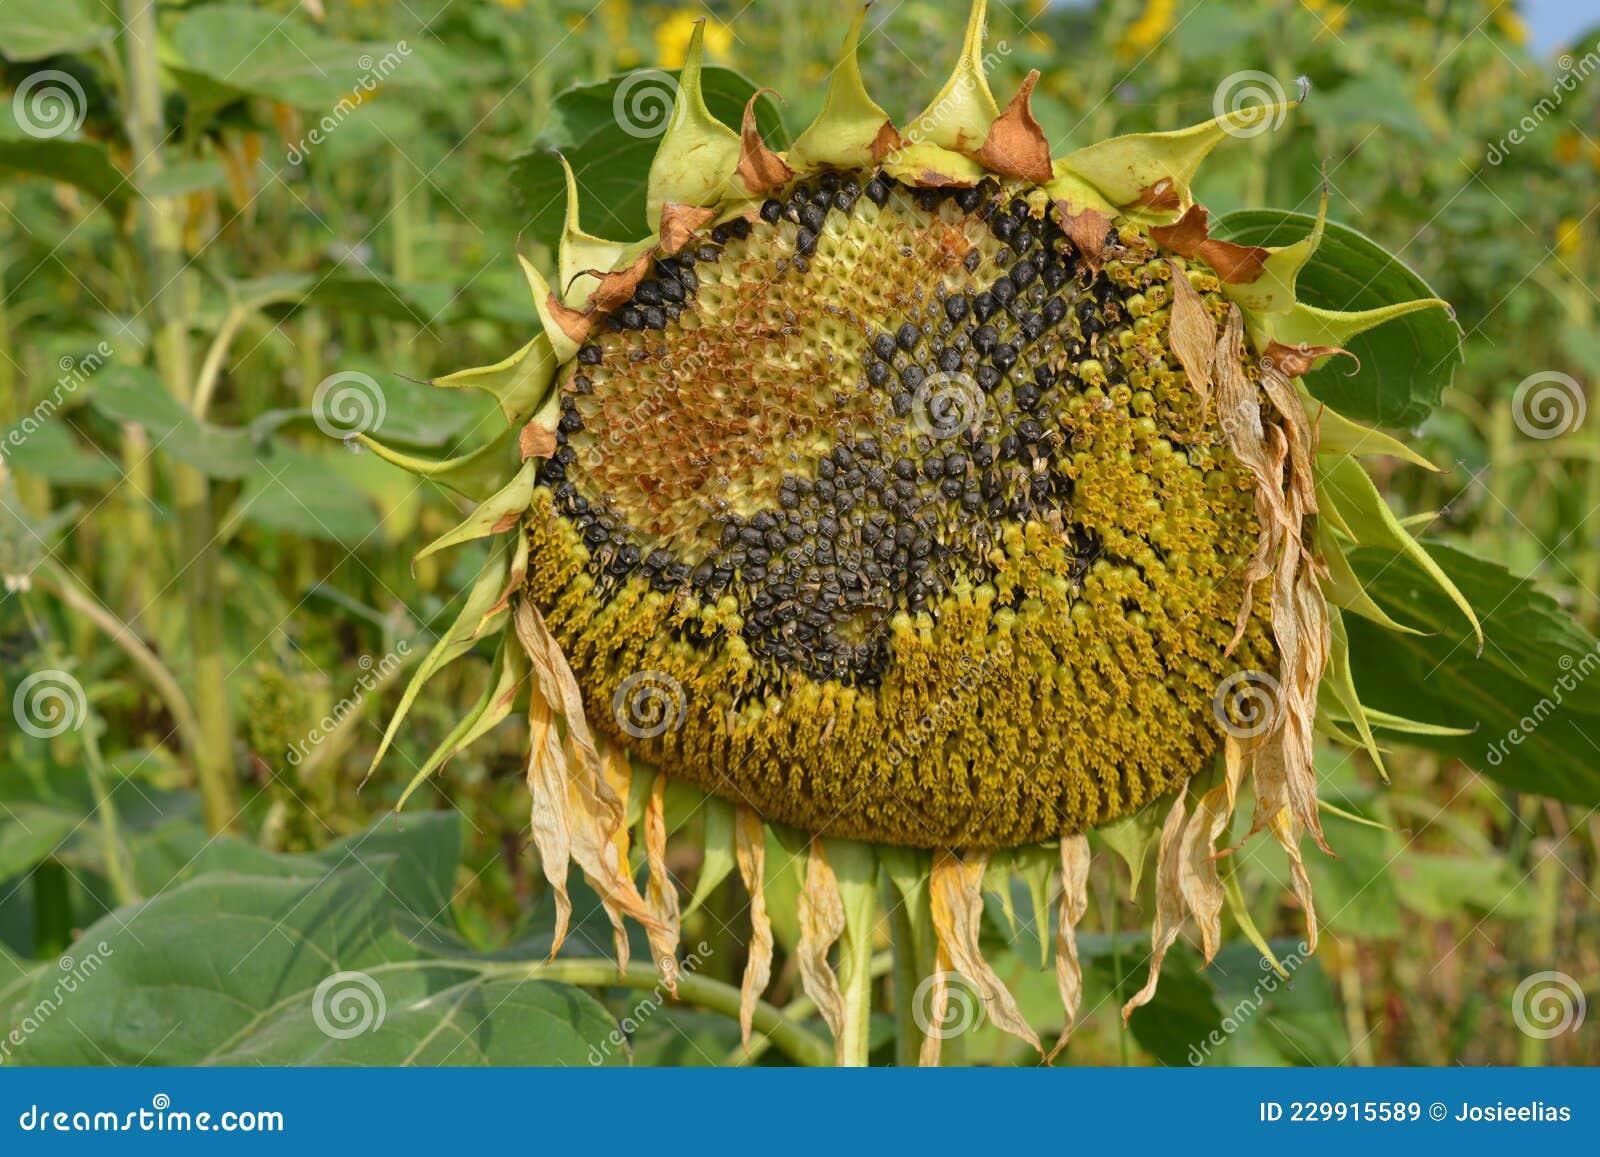 Sunflower Drying in Farm Field Stock Image - Image of pattern ...